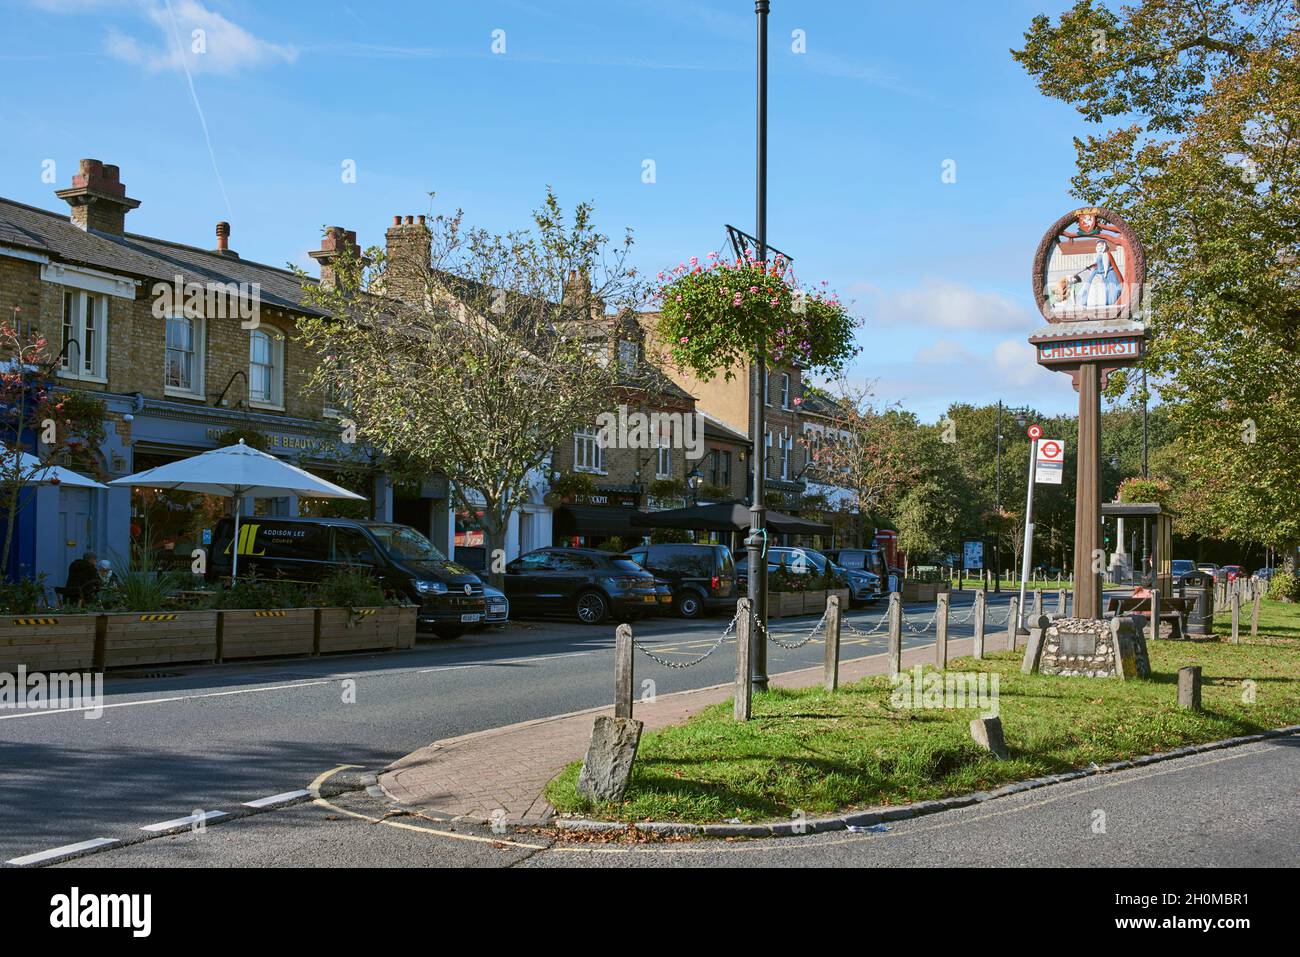 Royal Parade at Chislehurst, Kent, in the Borough of Bromley, South East England Stock Photo